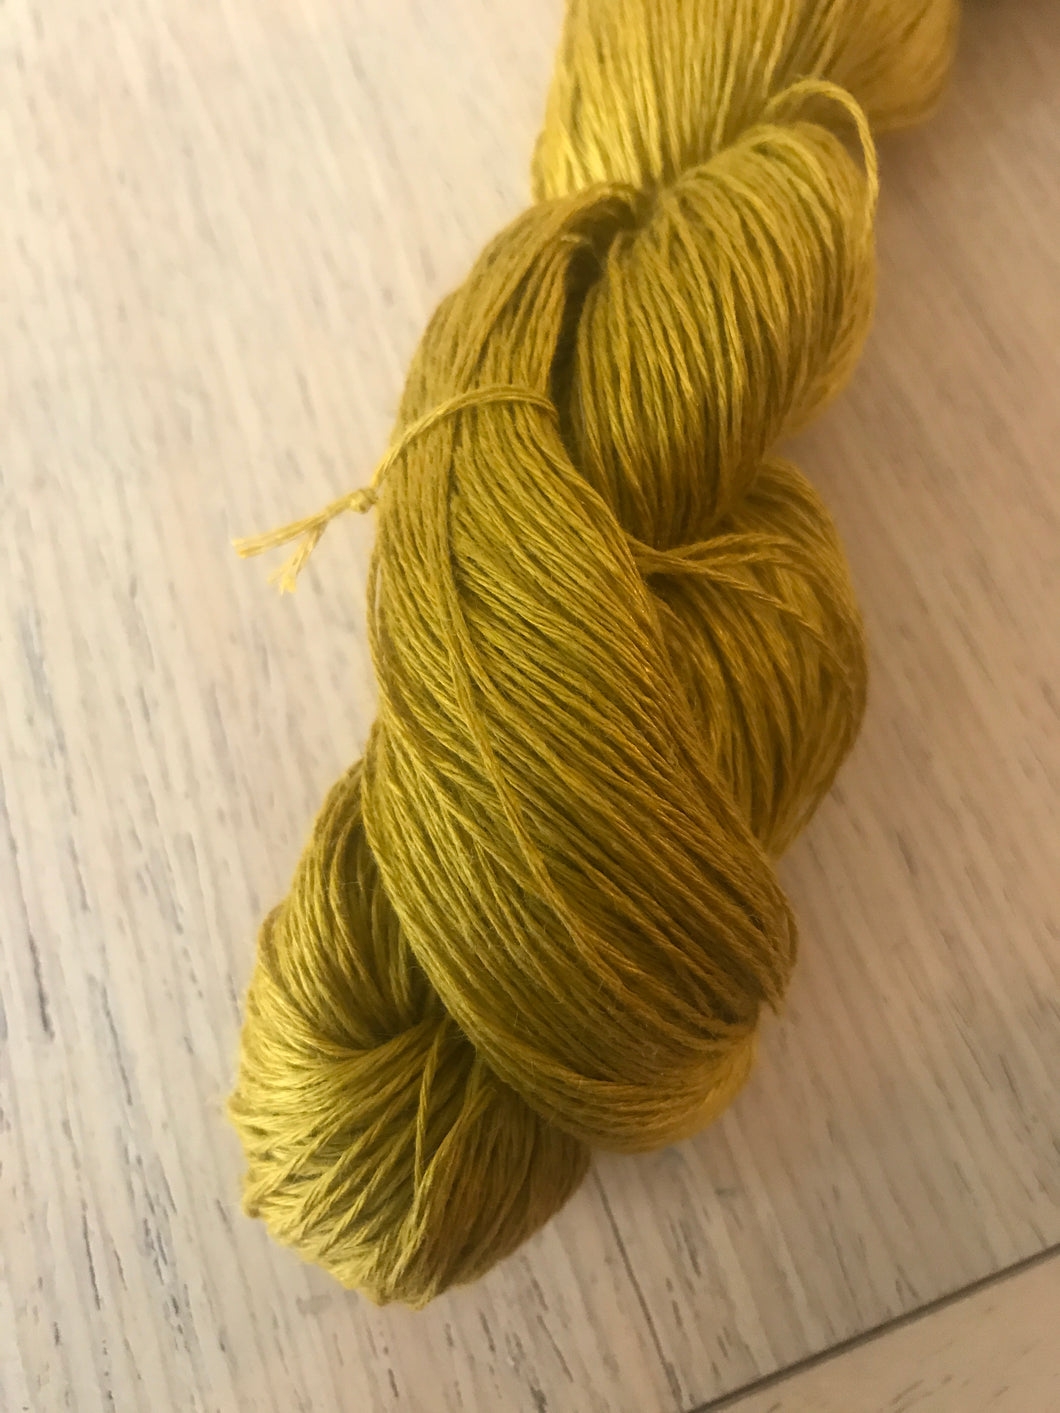 Lithuanian linen yarn by Midwinter colour 6.11